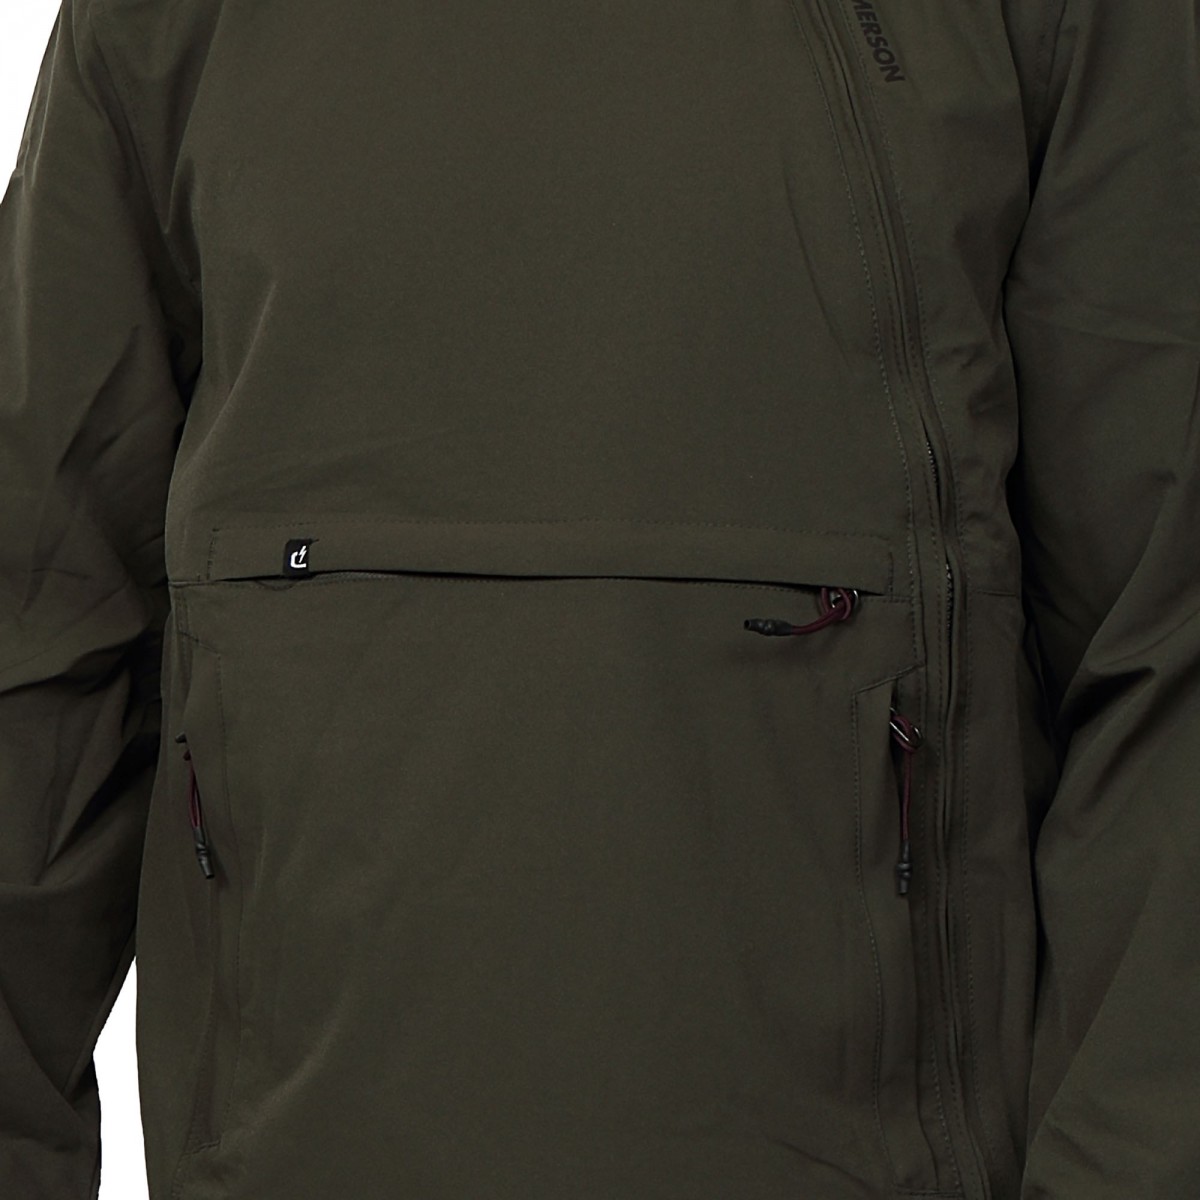 MENS PULLOVER JACKET WITH HOOD